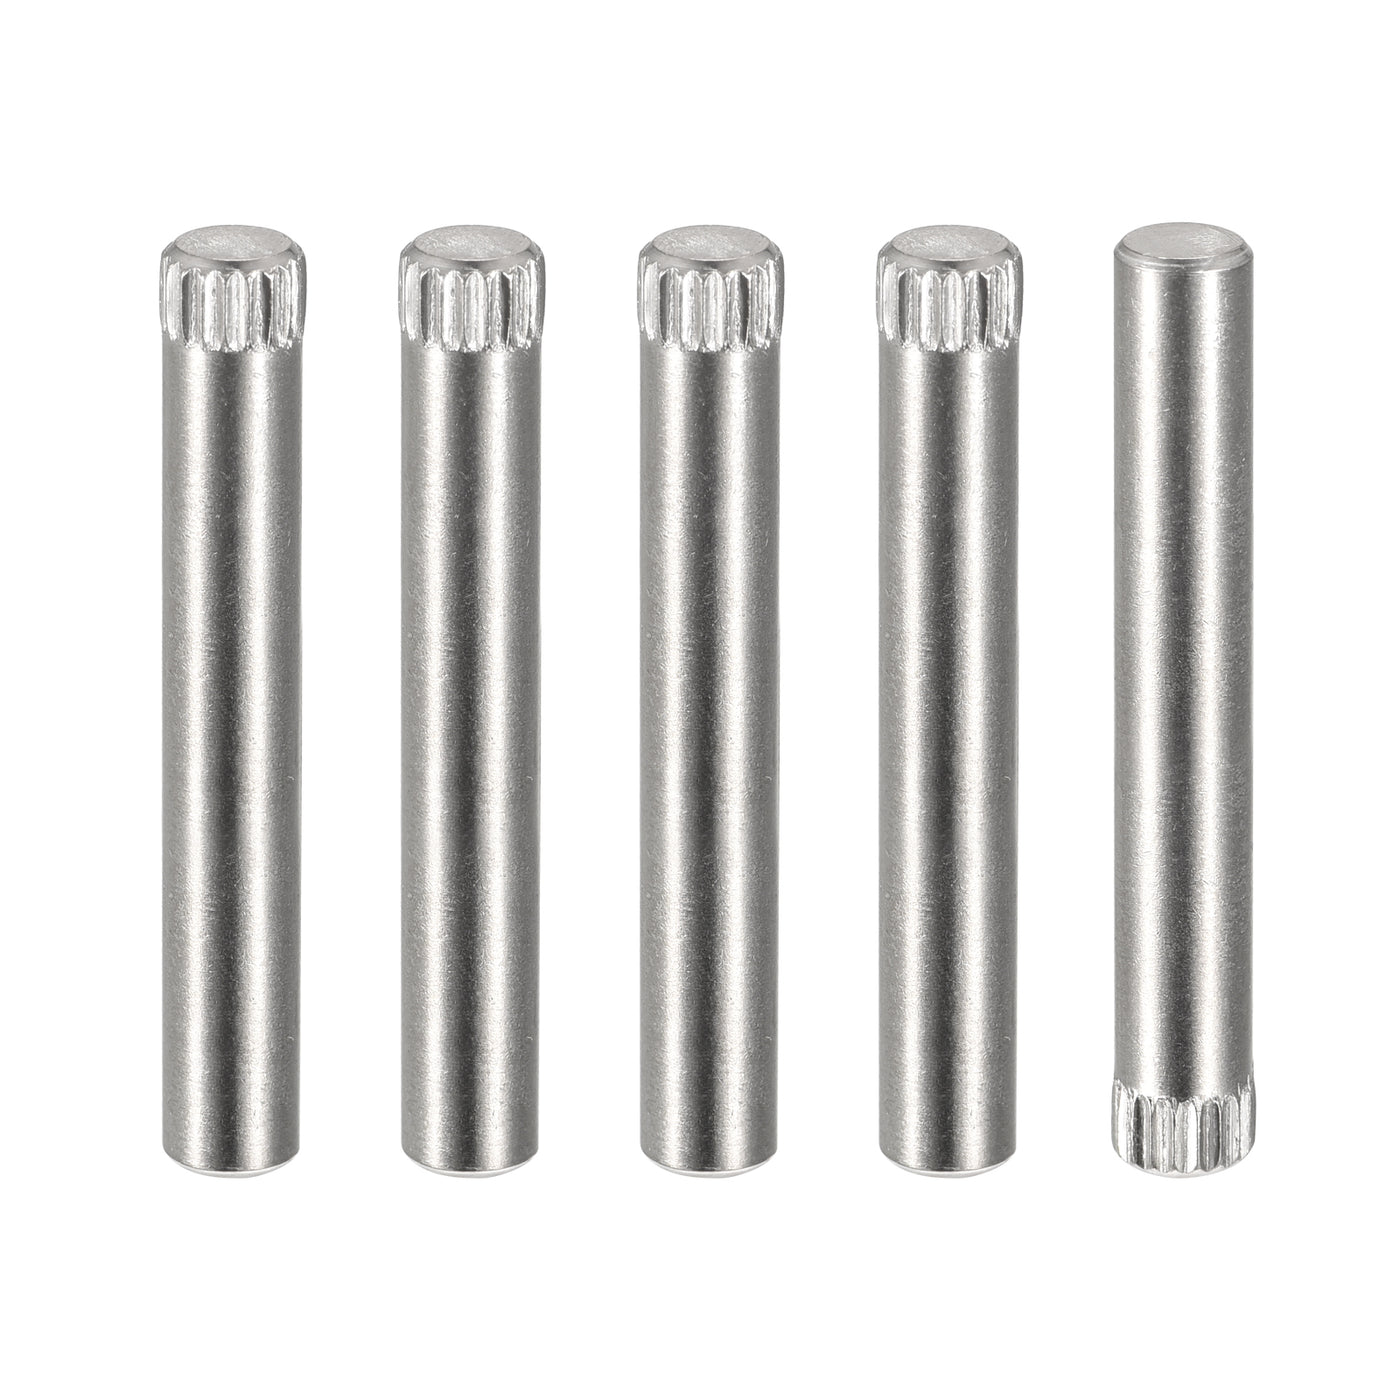 uxcell Uxcell 5x35mm 304 Stainless Steel Dowel Pins, 5Pcs Knurled Head Flat End Dowel Pin